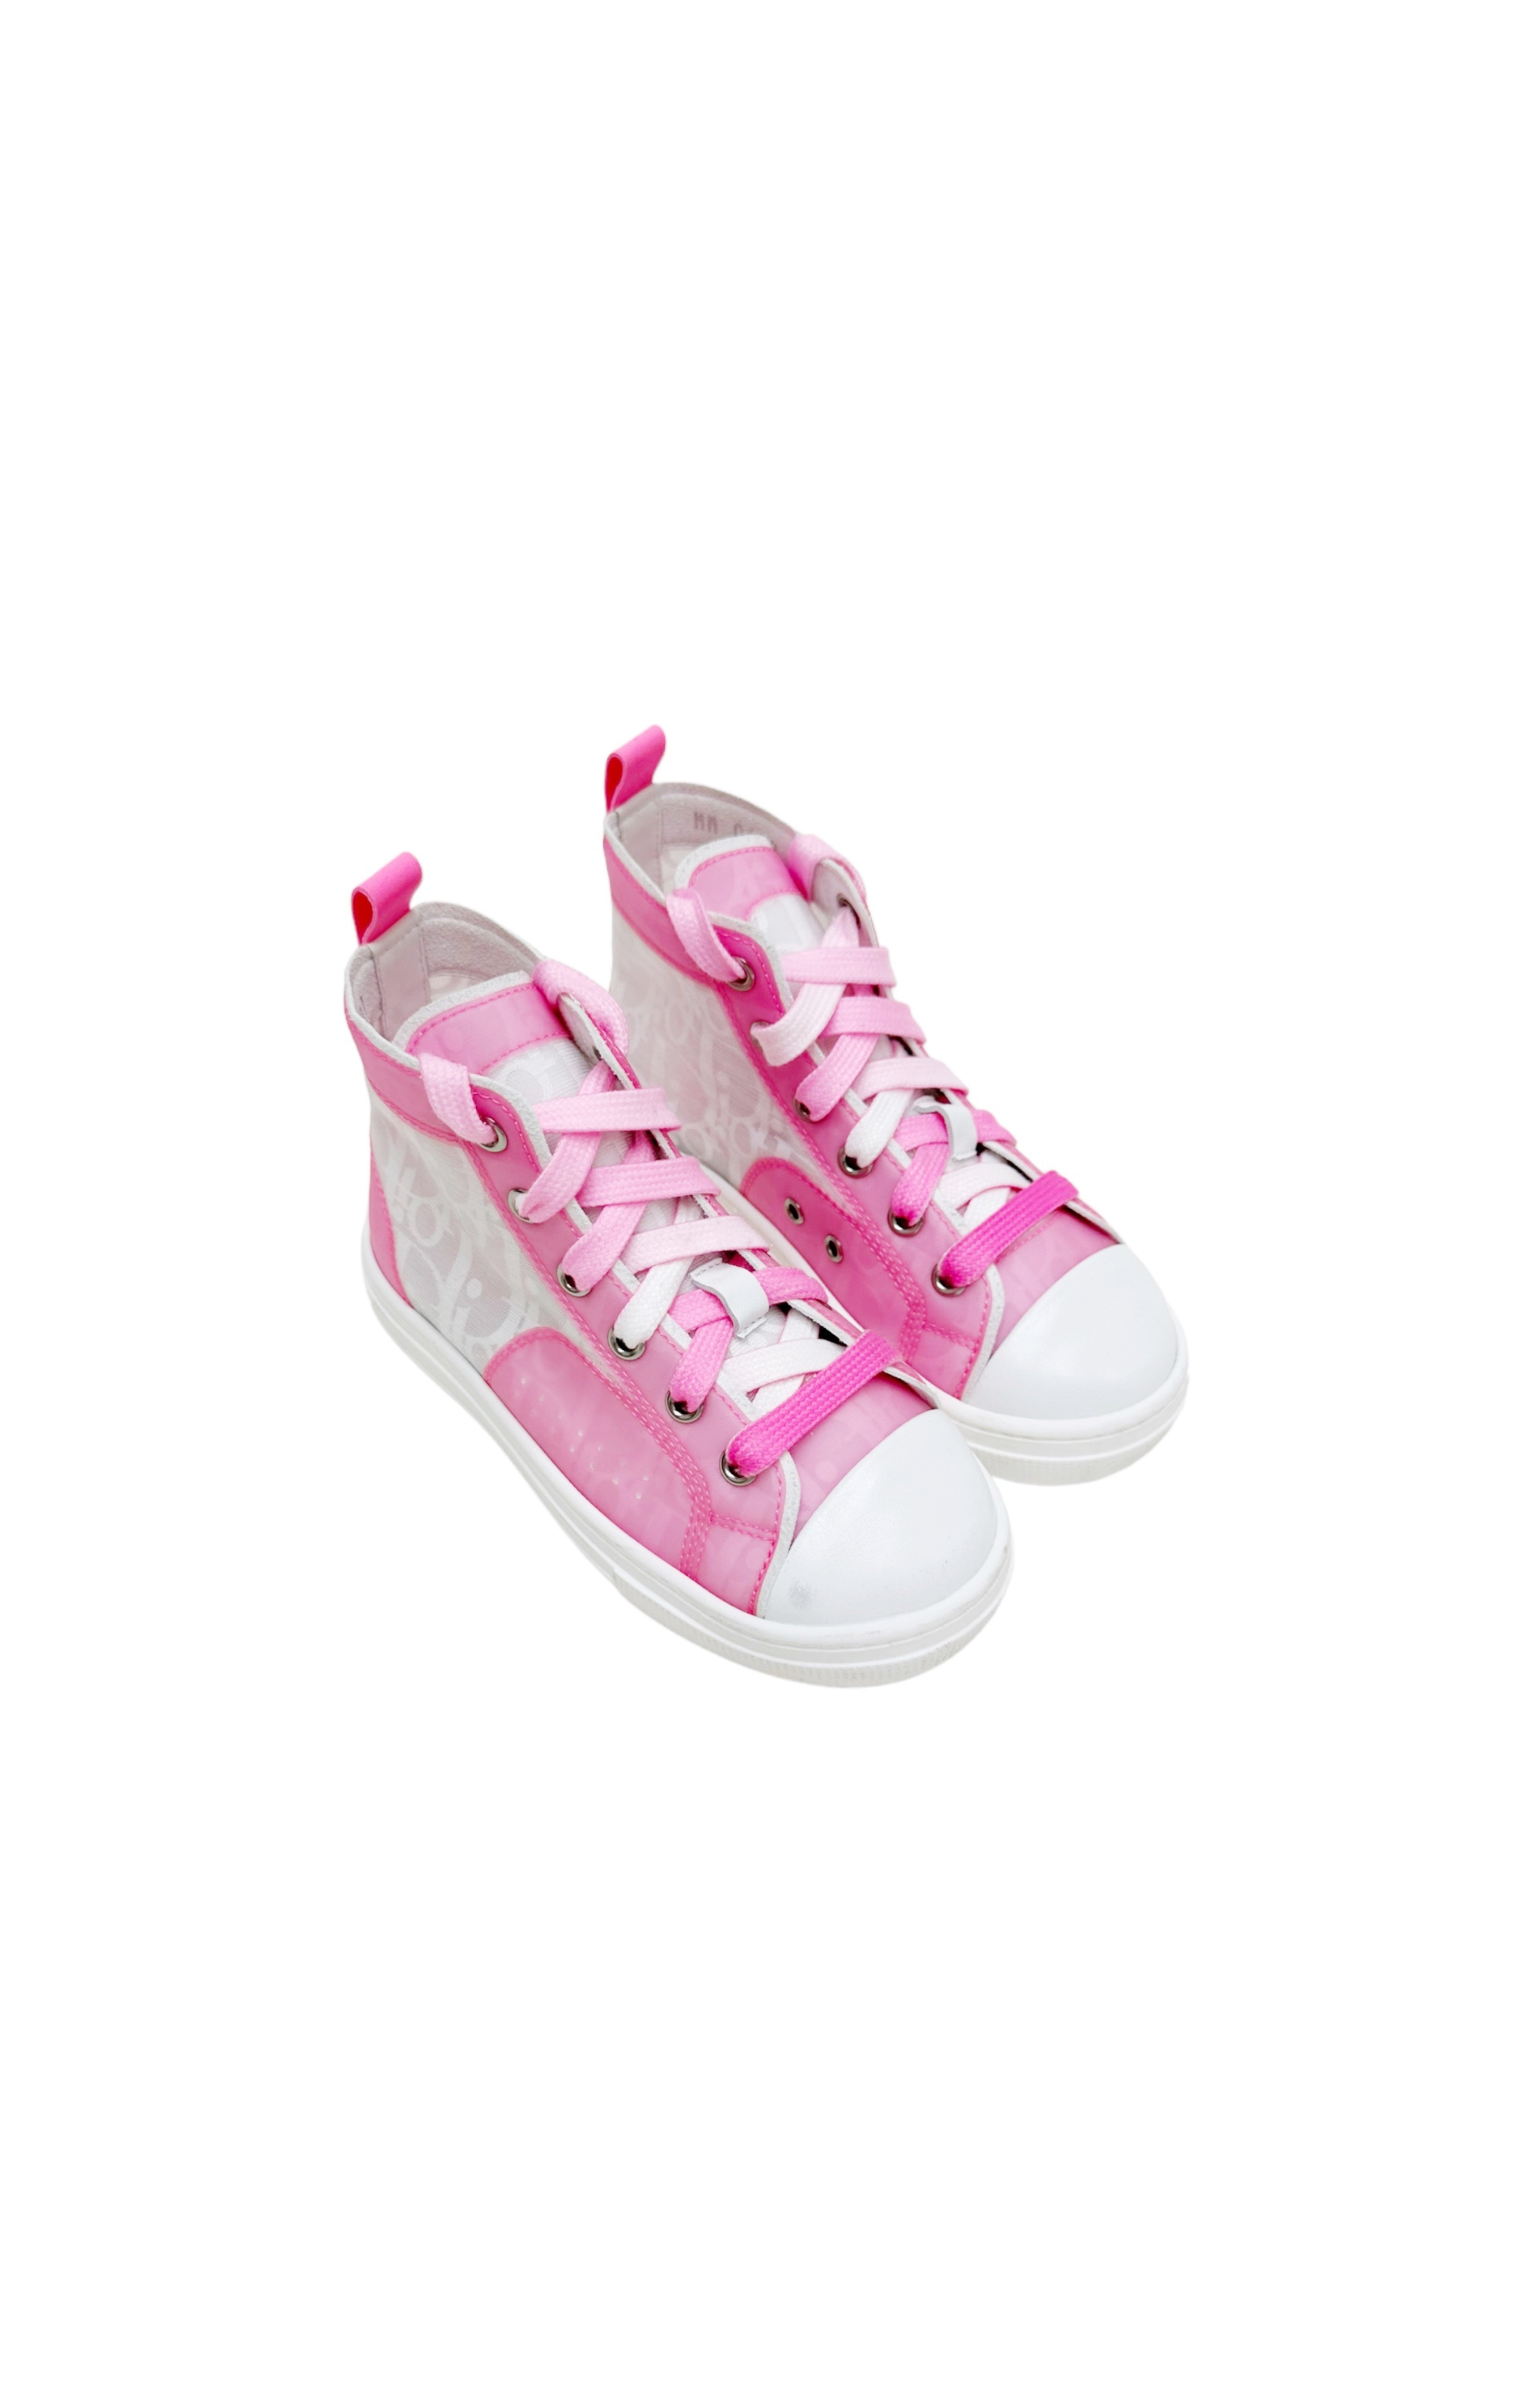 DIOR (RARE) Sneakers Size: EUR 27 / Toddler US 10.5